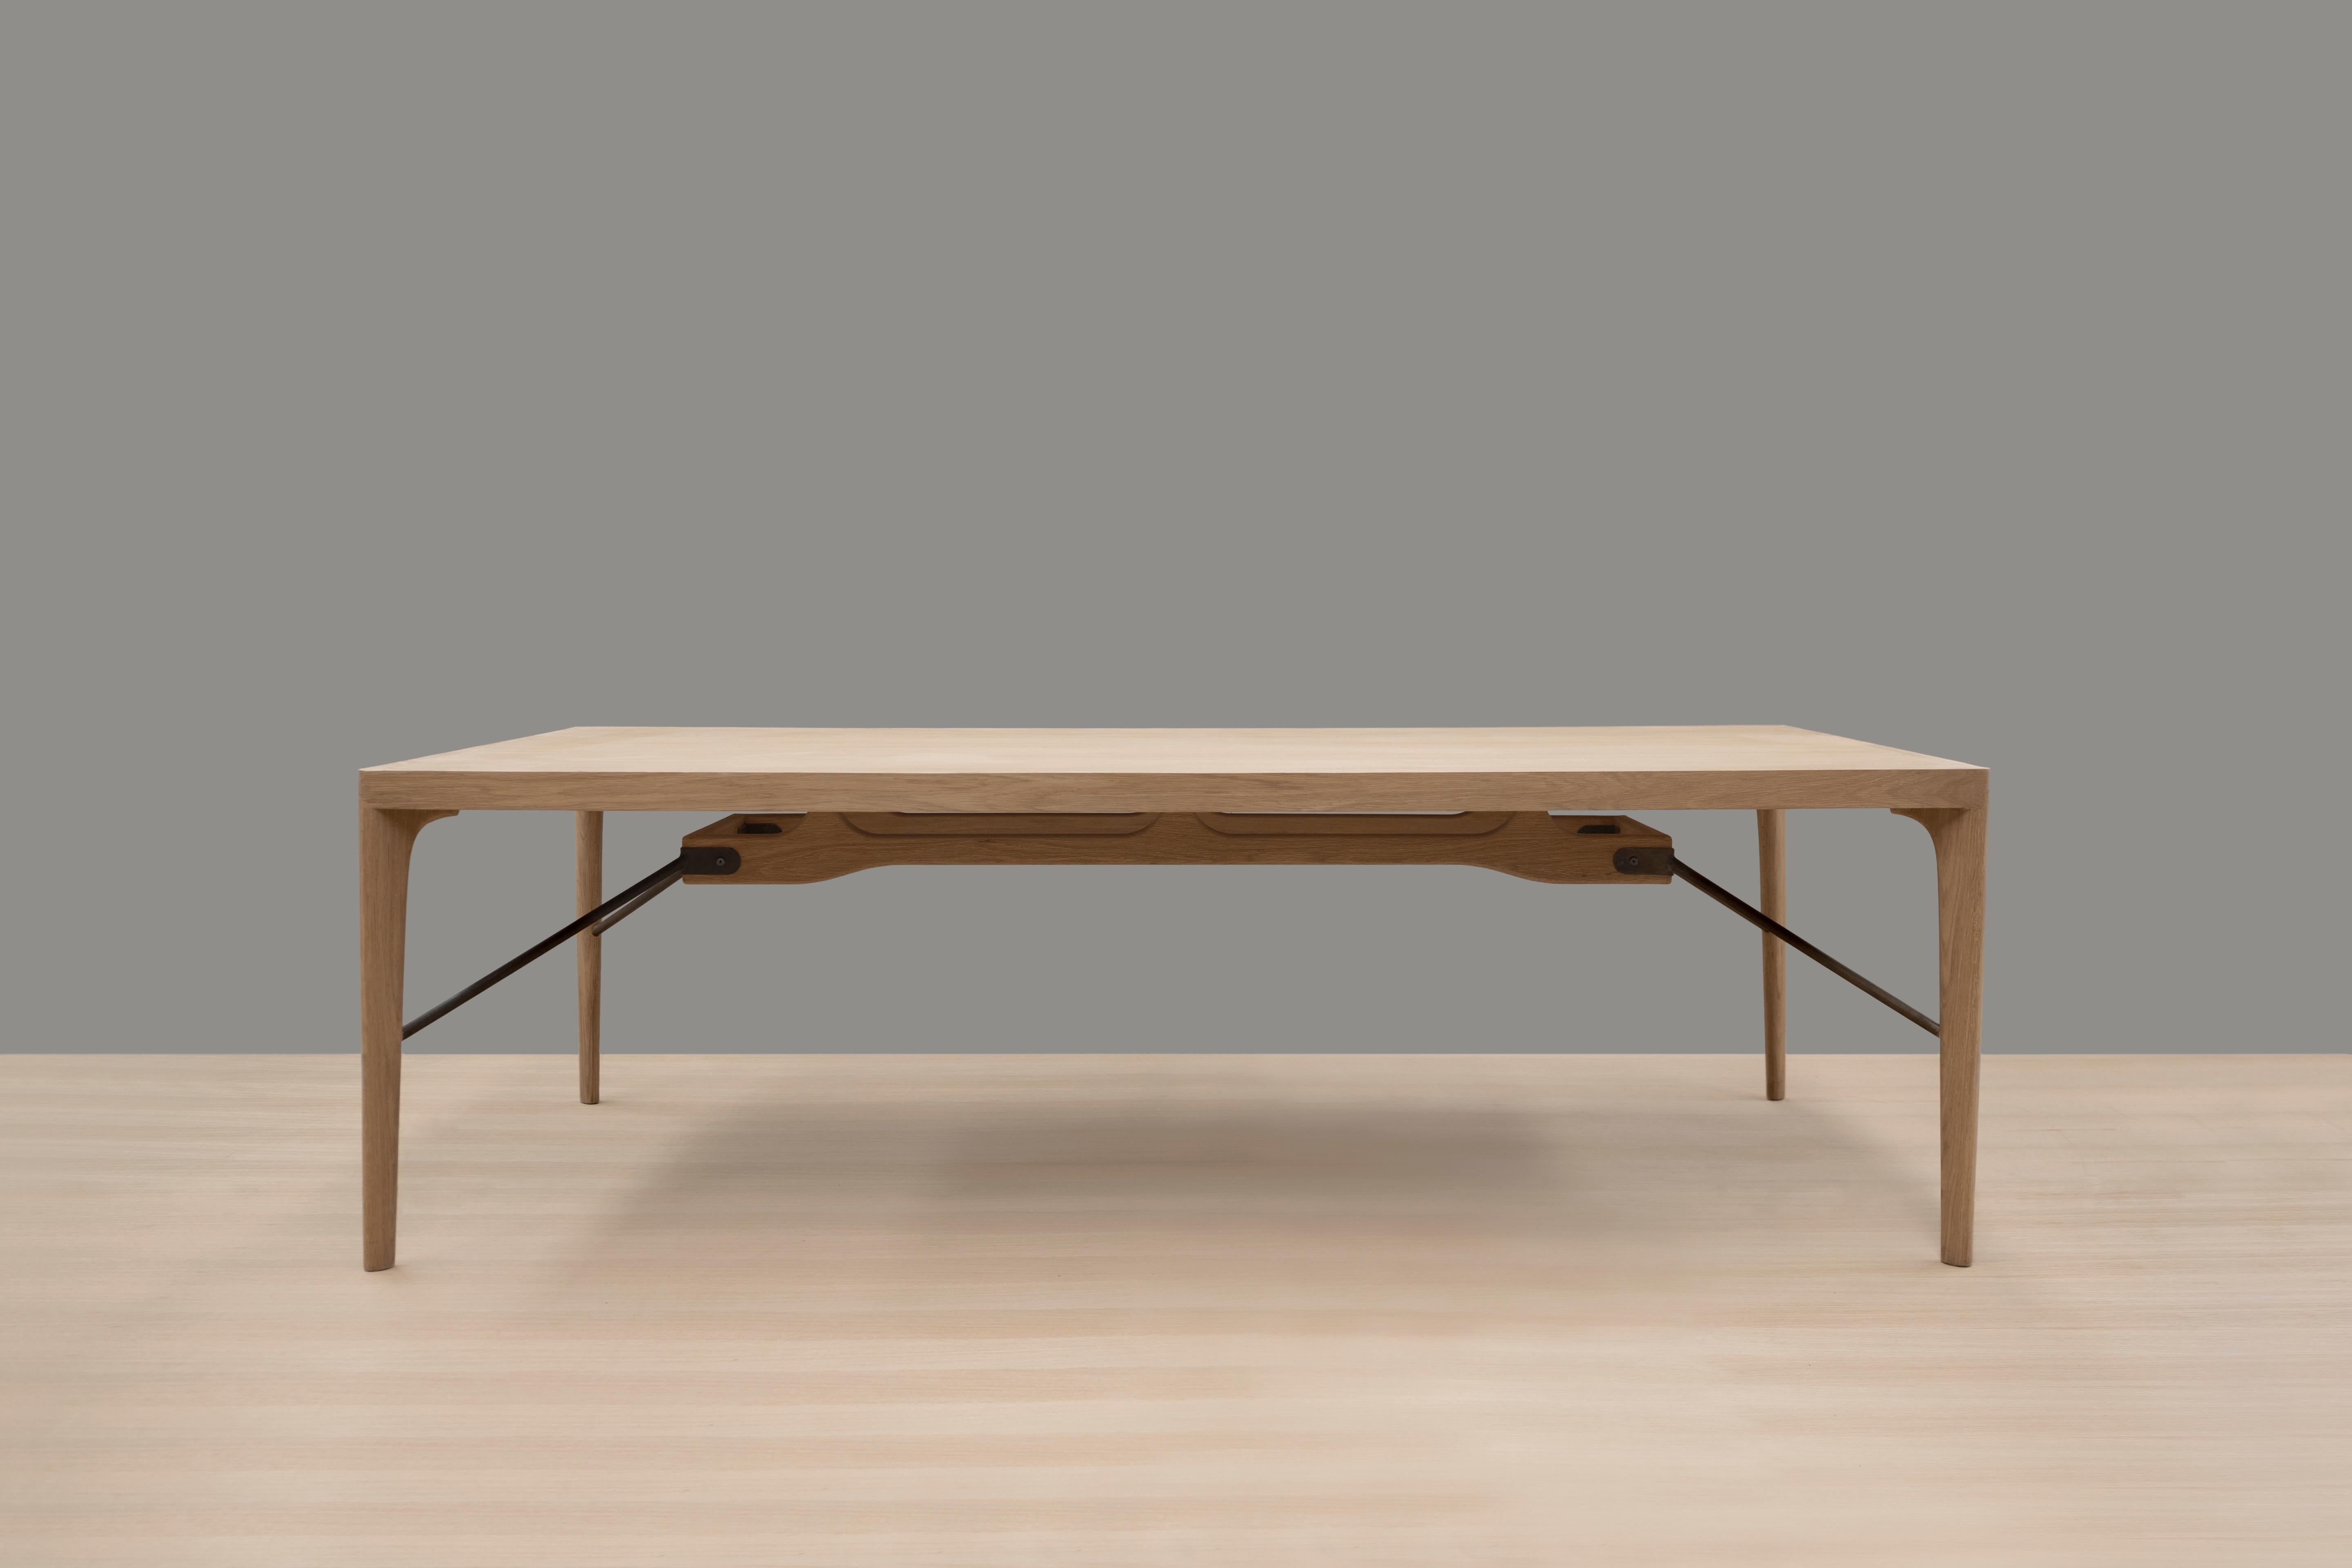 Gerard dining table by Thai Hua
Dimensions: D 280 x W 122 x H 75 cm
Materials: oak wood.

Dining table made of natural white oak.

Thai Hua is an Industrial designer originally from Vietnam trained in Switzerland. Since 2003 Thai Hua has